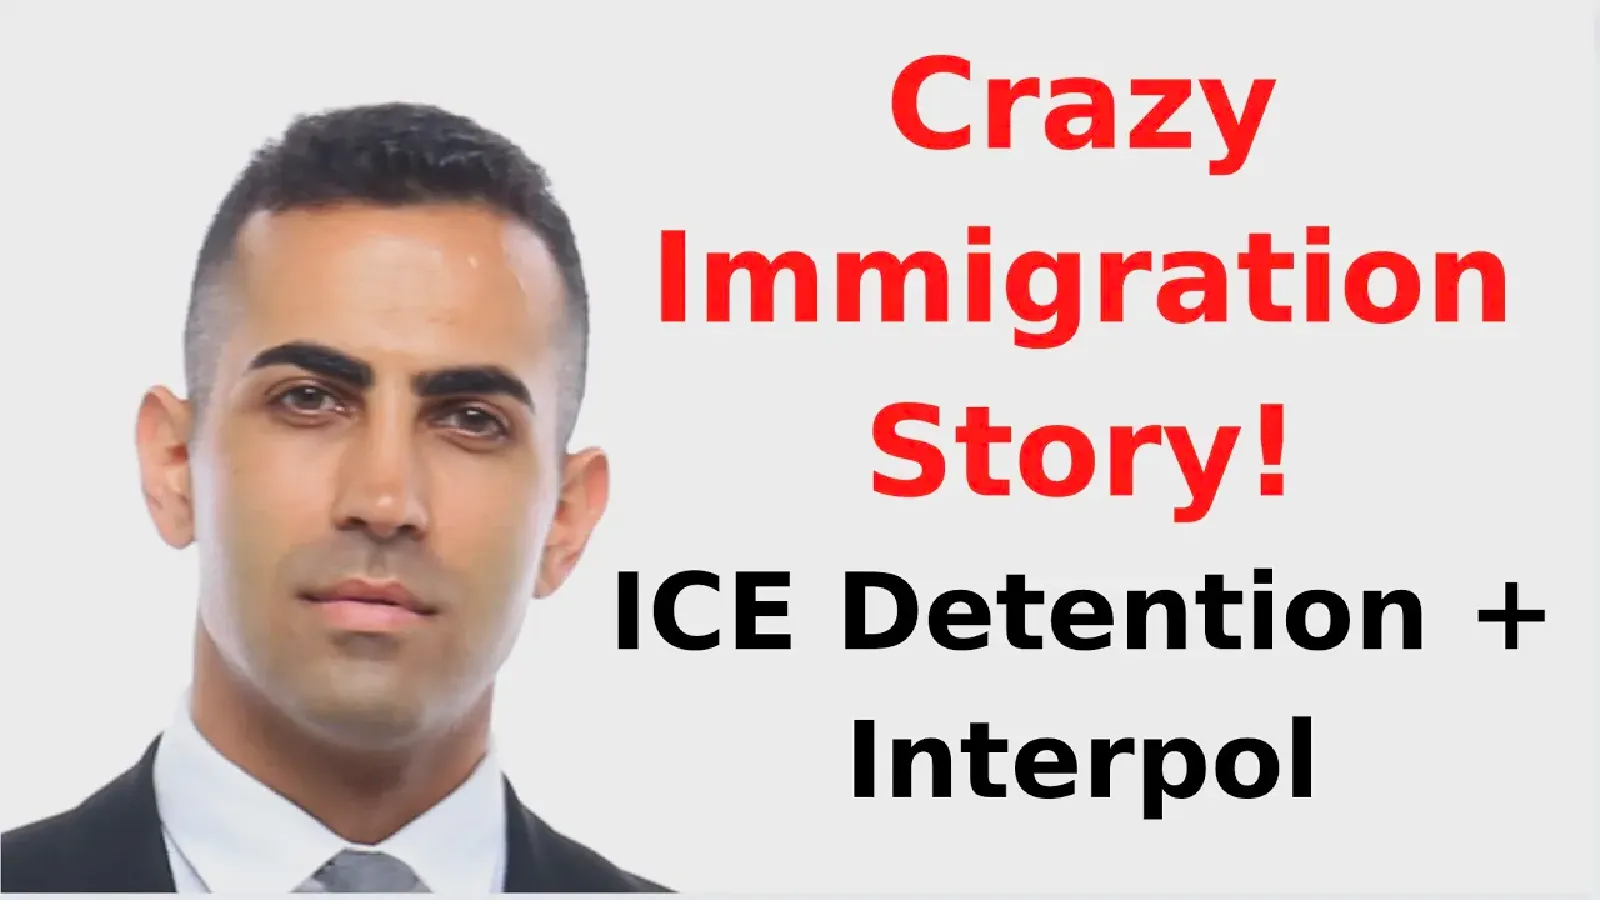 Crazy Immigration Story: ICE Detention, Interpol and more